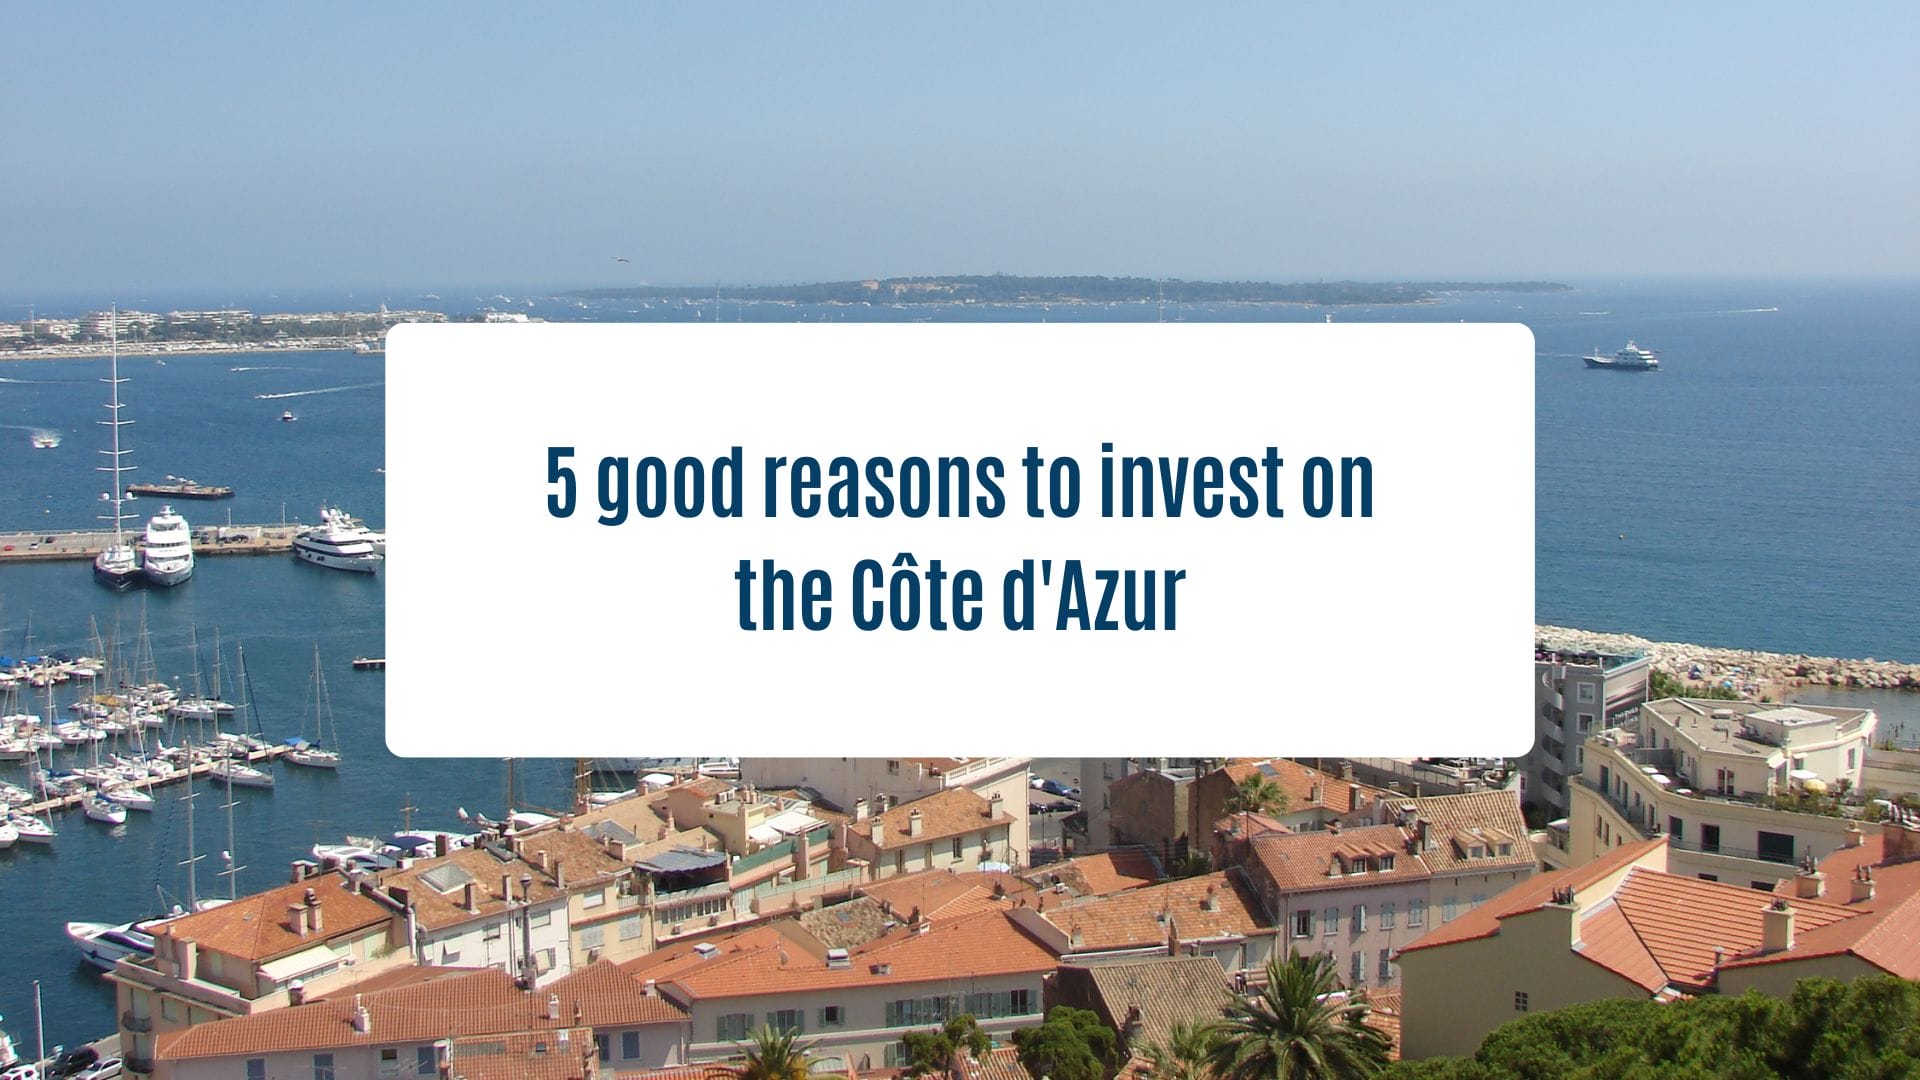 News Olam Properties - 5 good reasons to invest on the Côte d'Azur